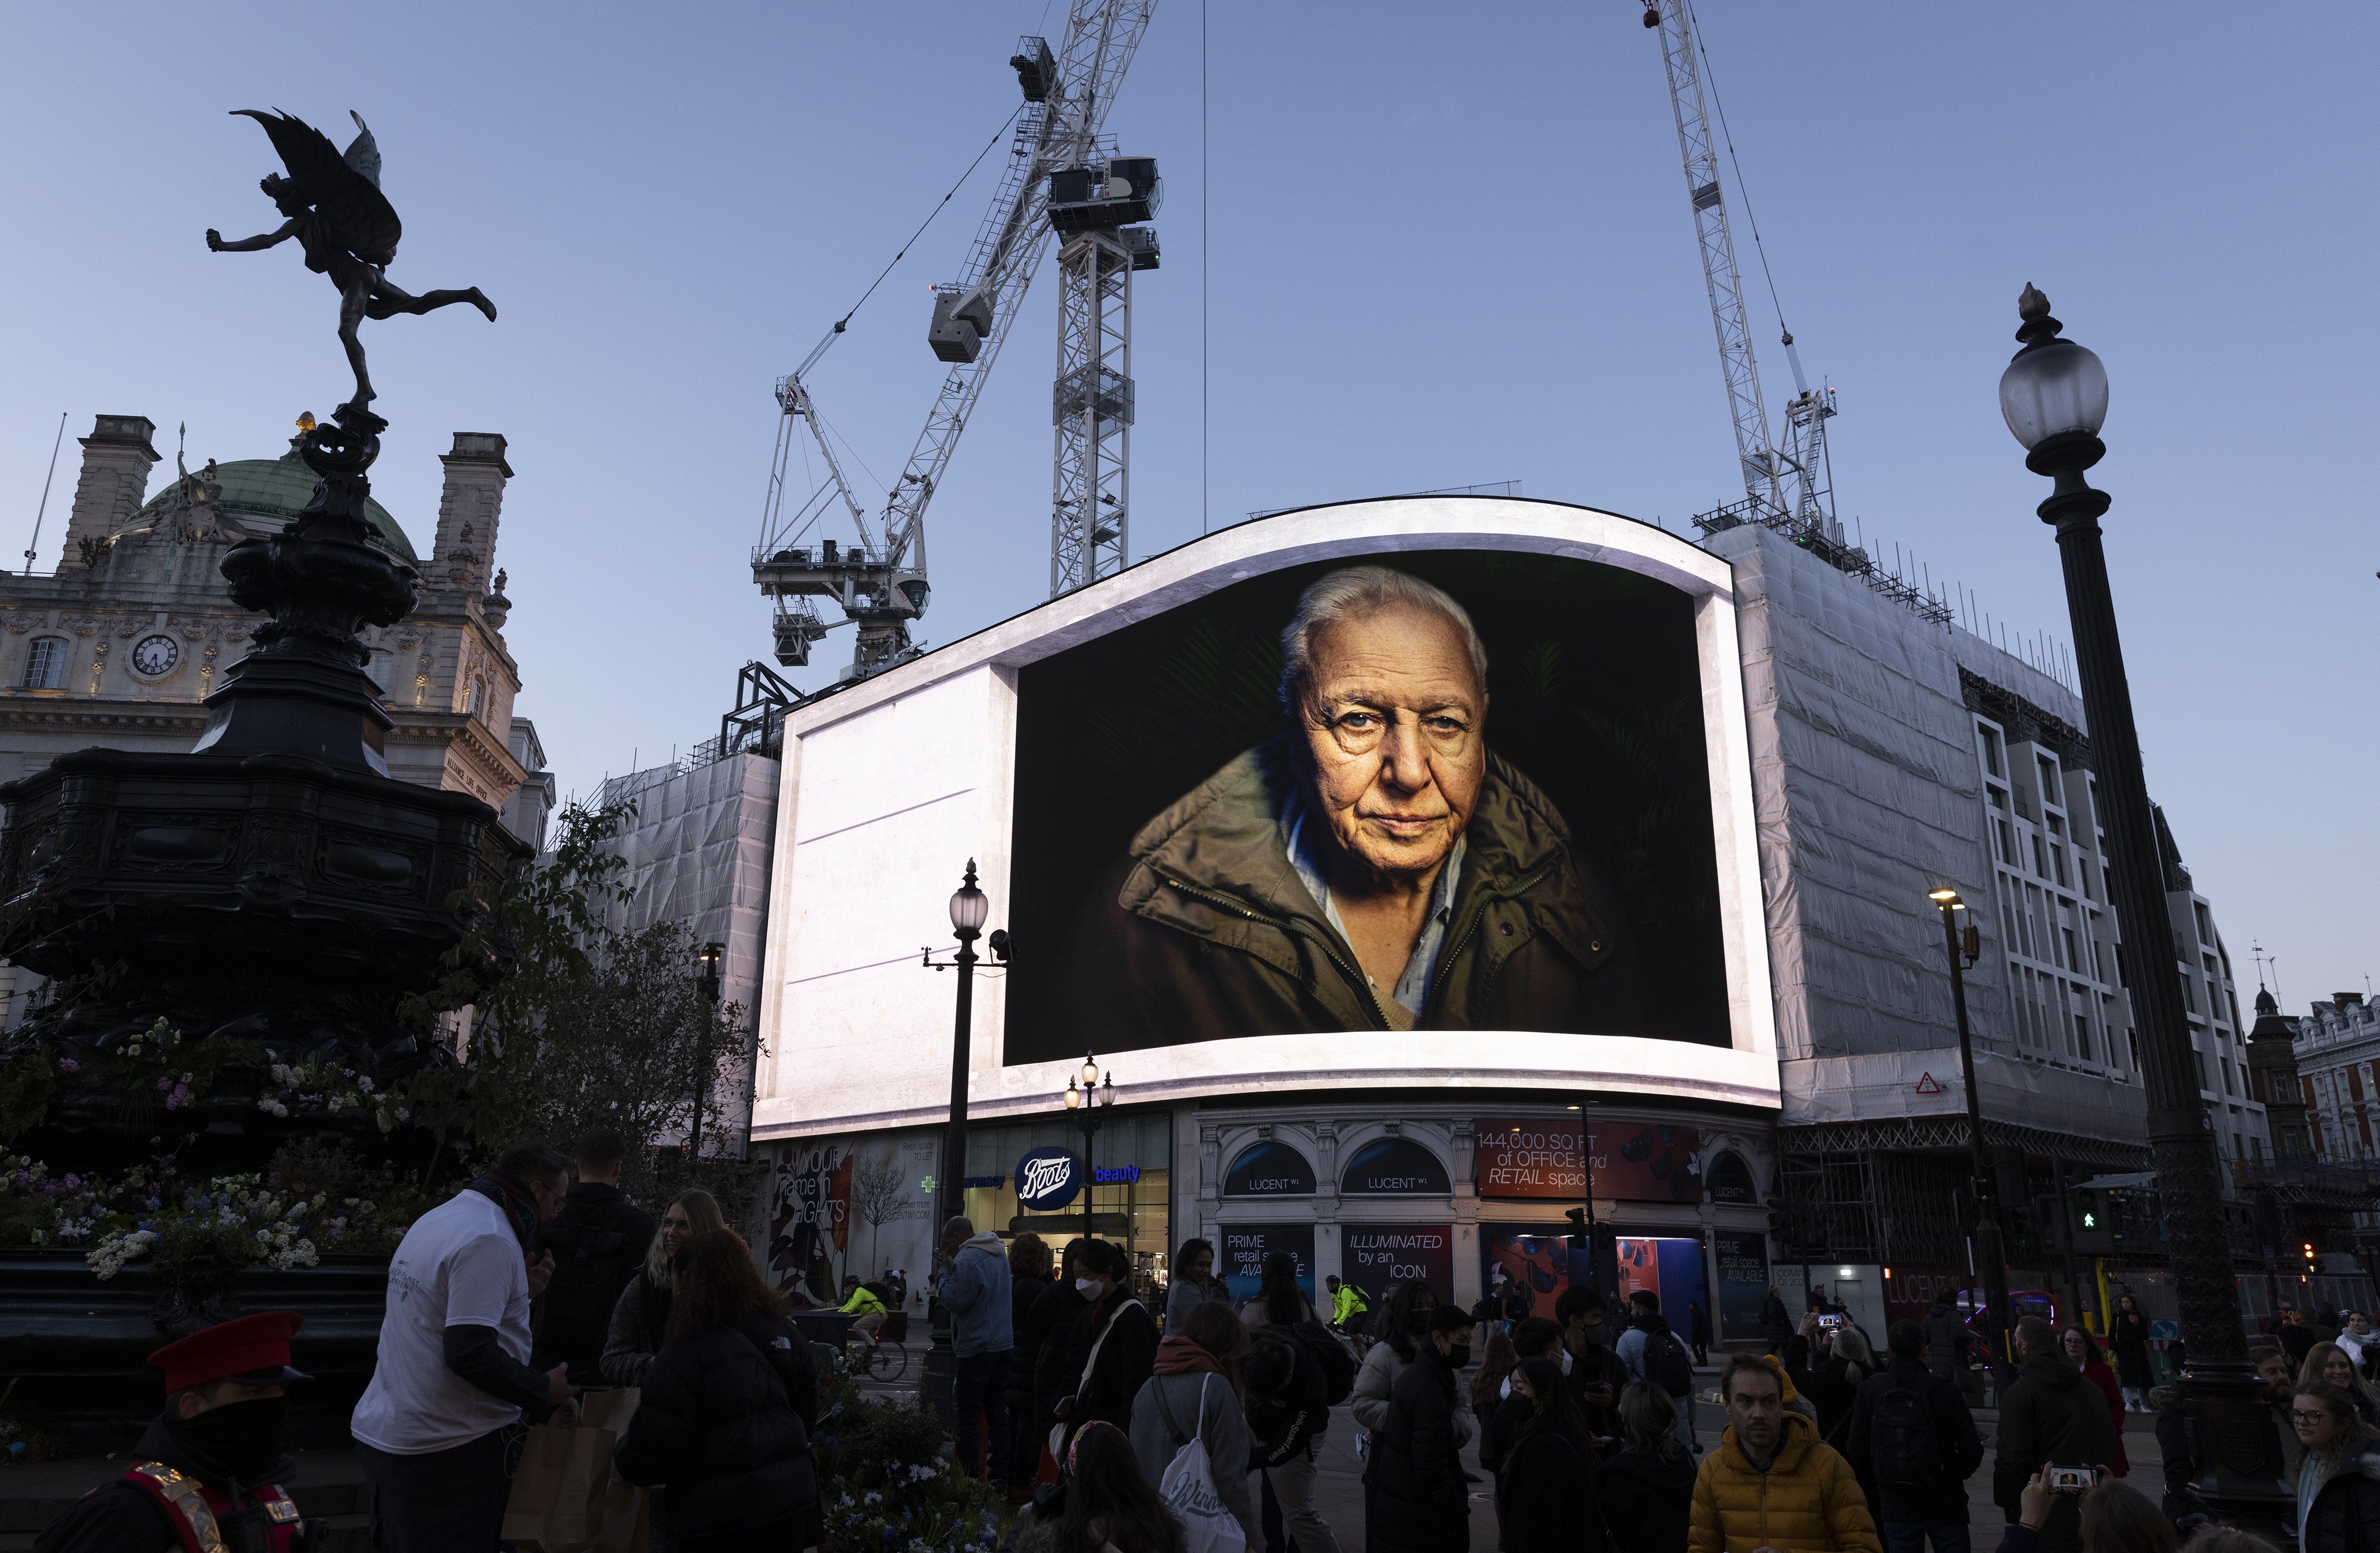 The veteran broadcaster alerted commuters about the importance of plants via Piccadilly Circus’s advertising screens (Matt Alexander/PA)